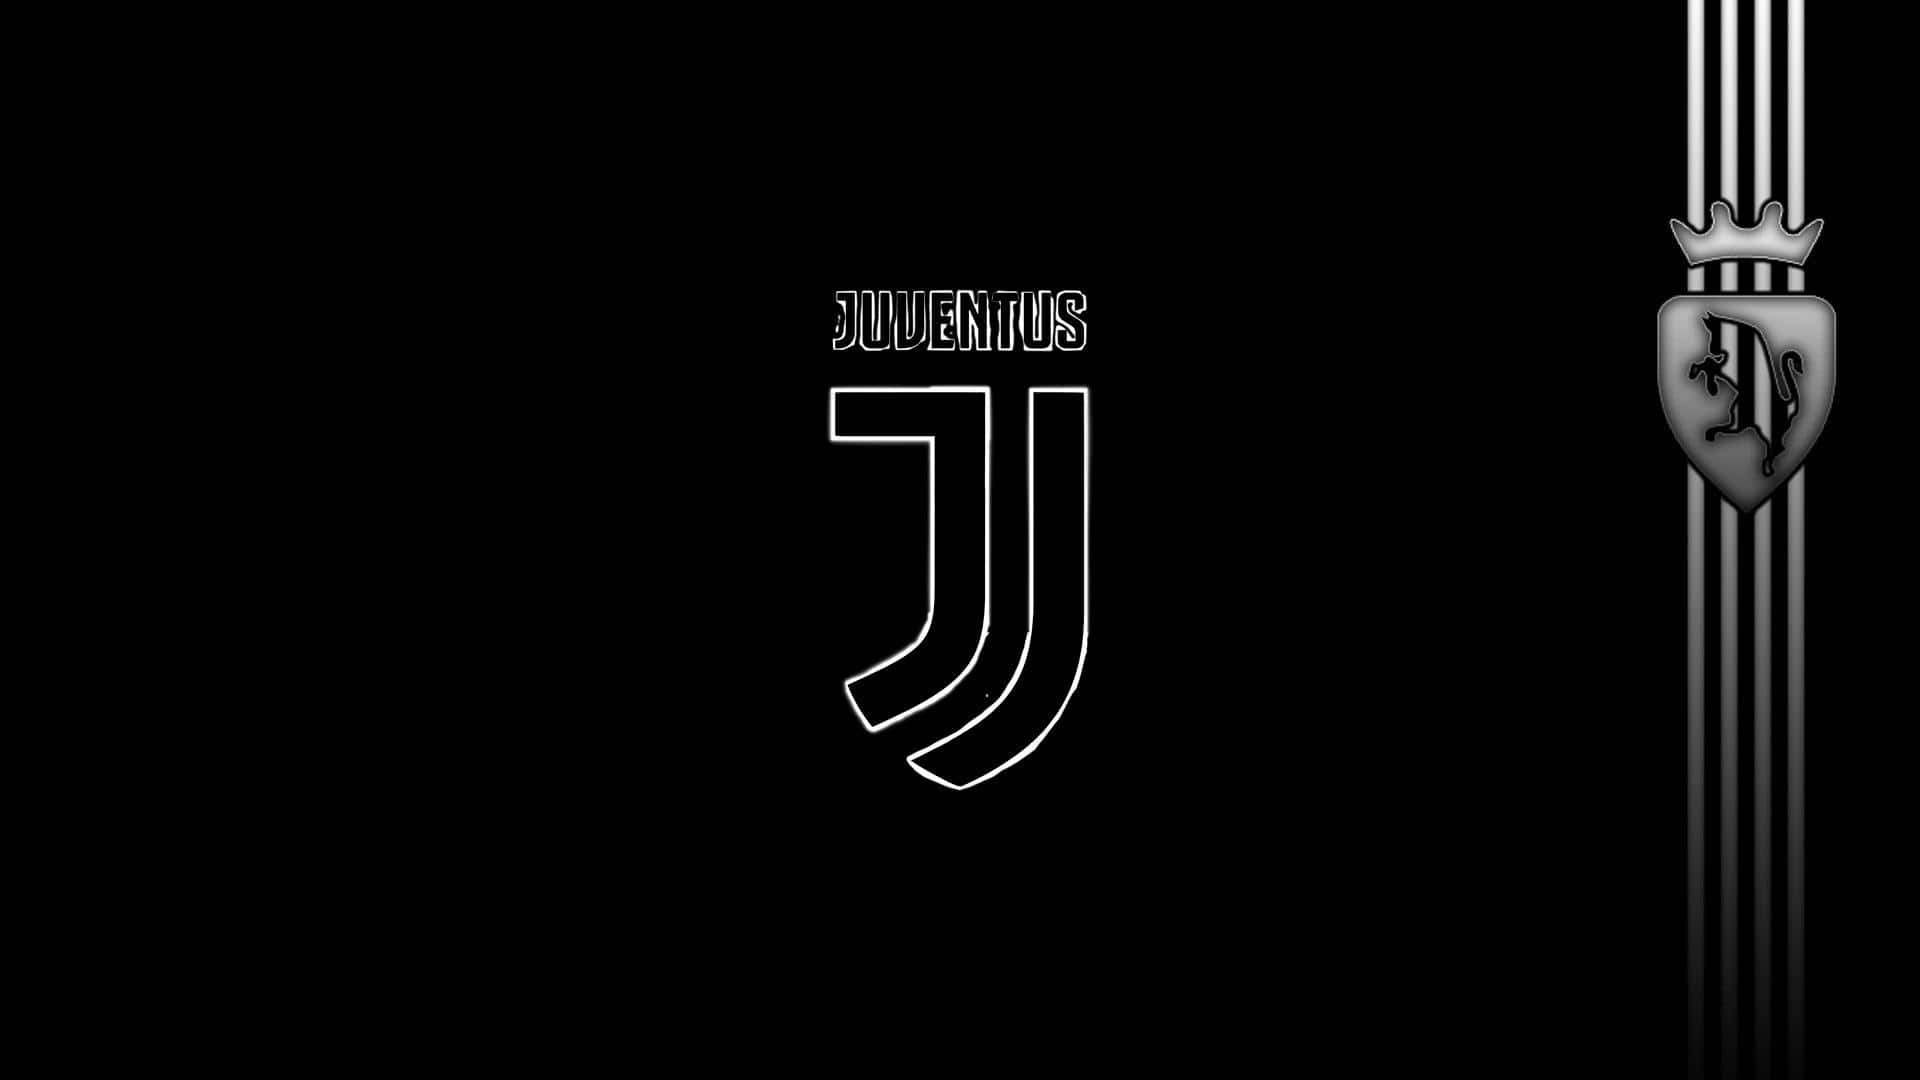 "Juventus On the March"